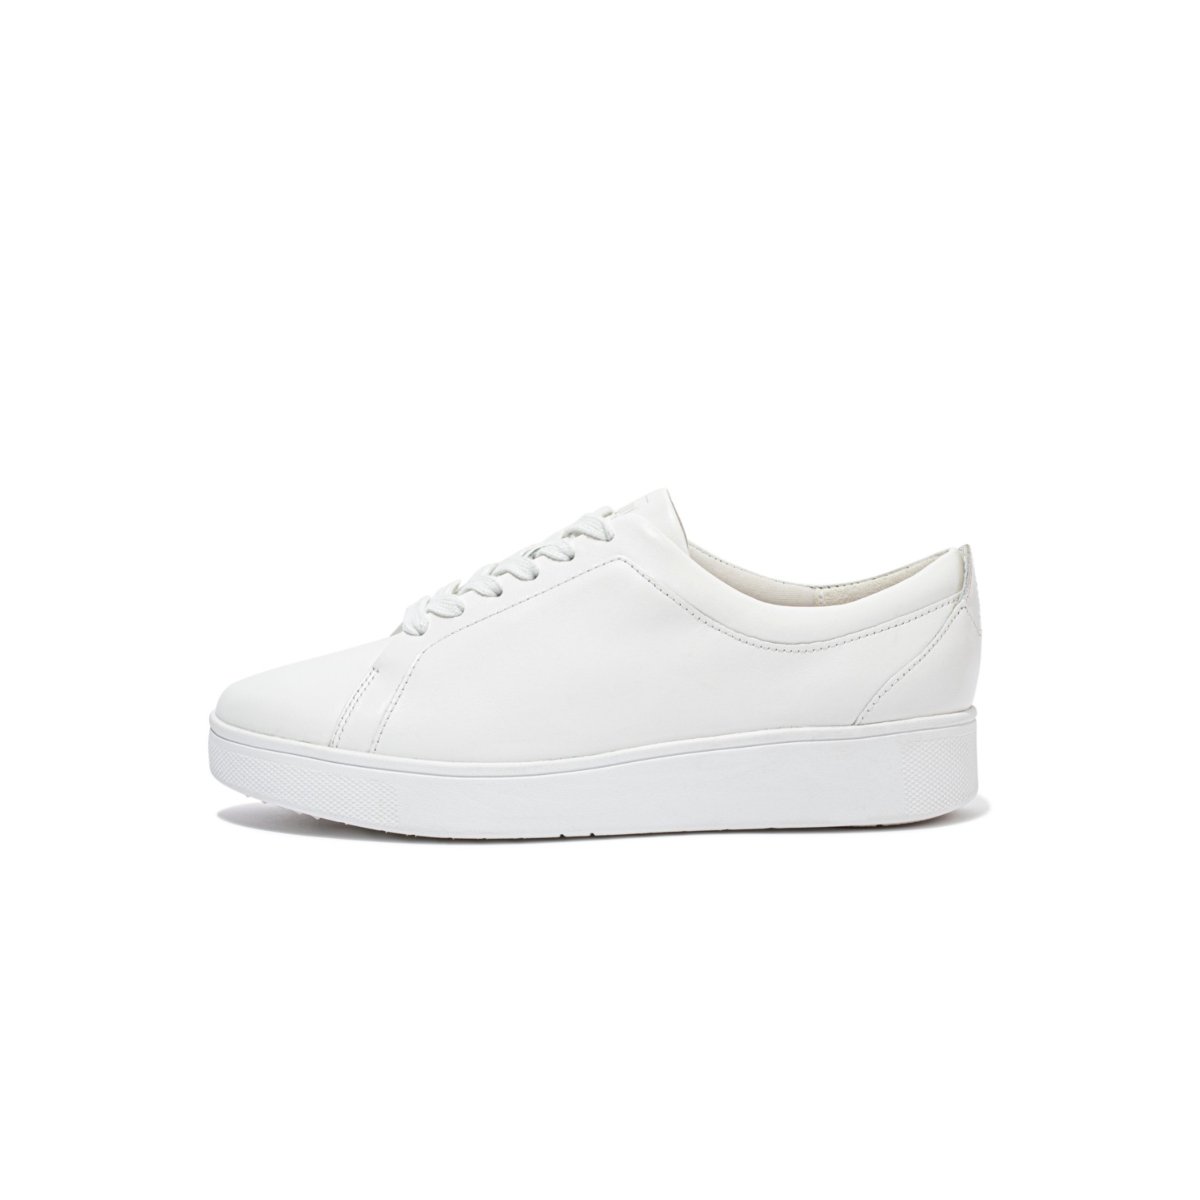 FitFlop RALLY Leather Trainers Urban White front view